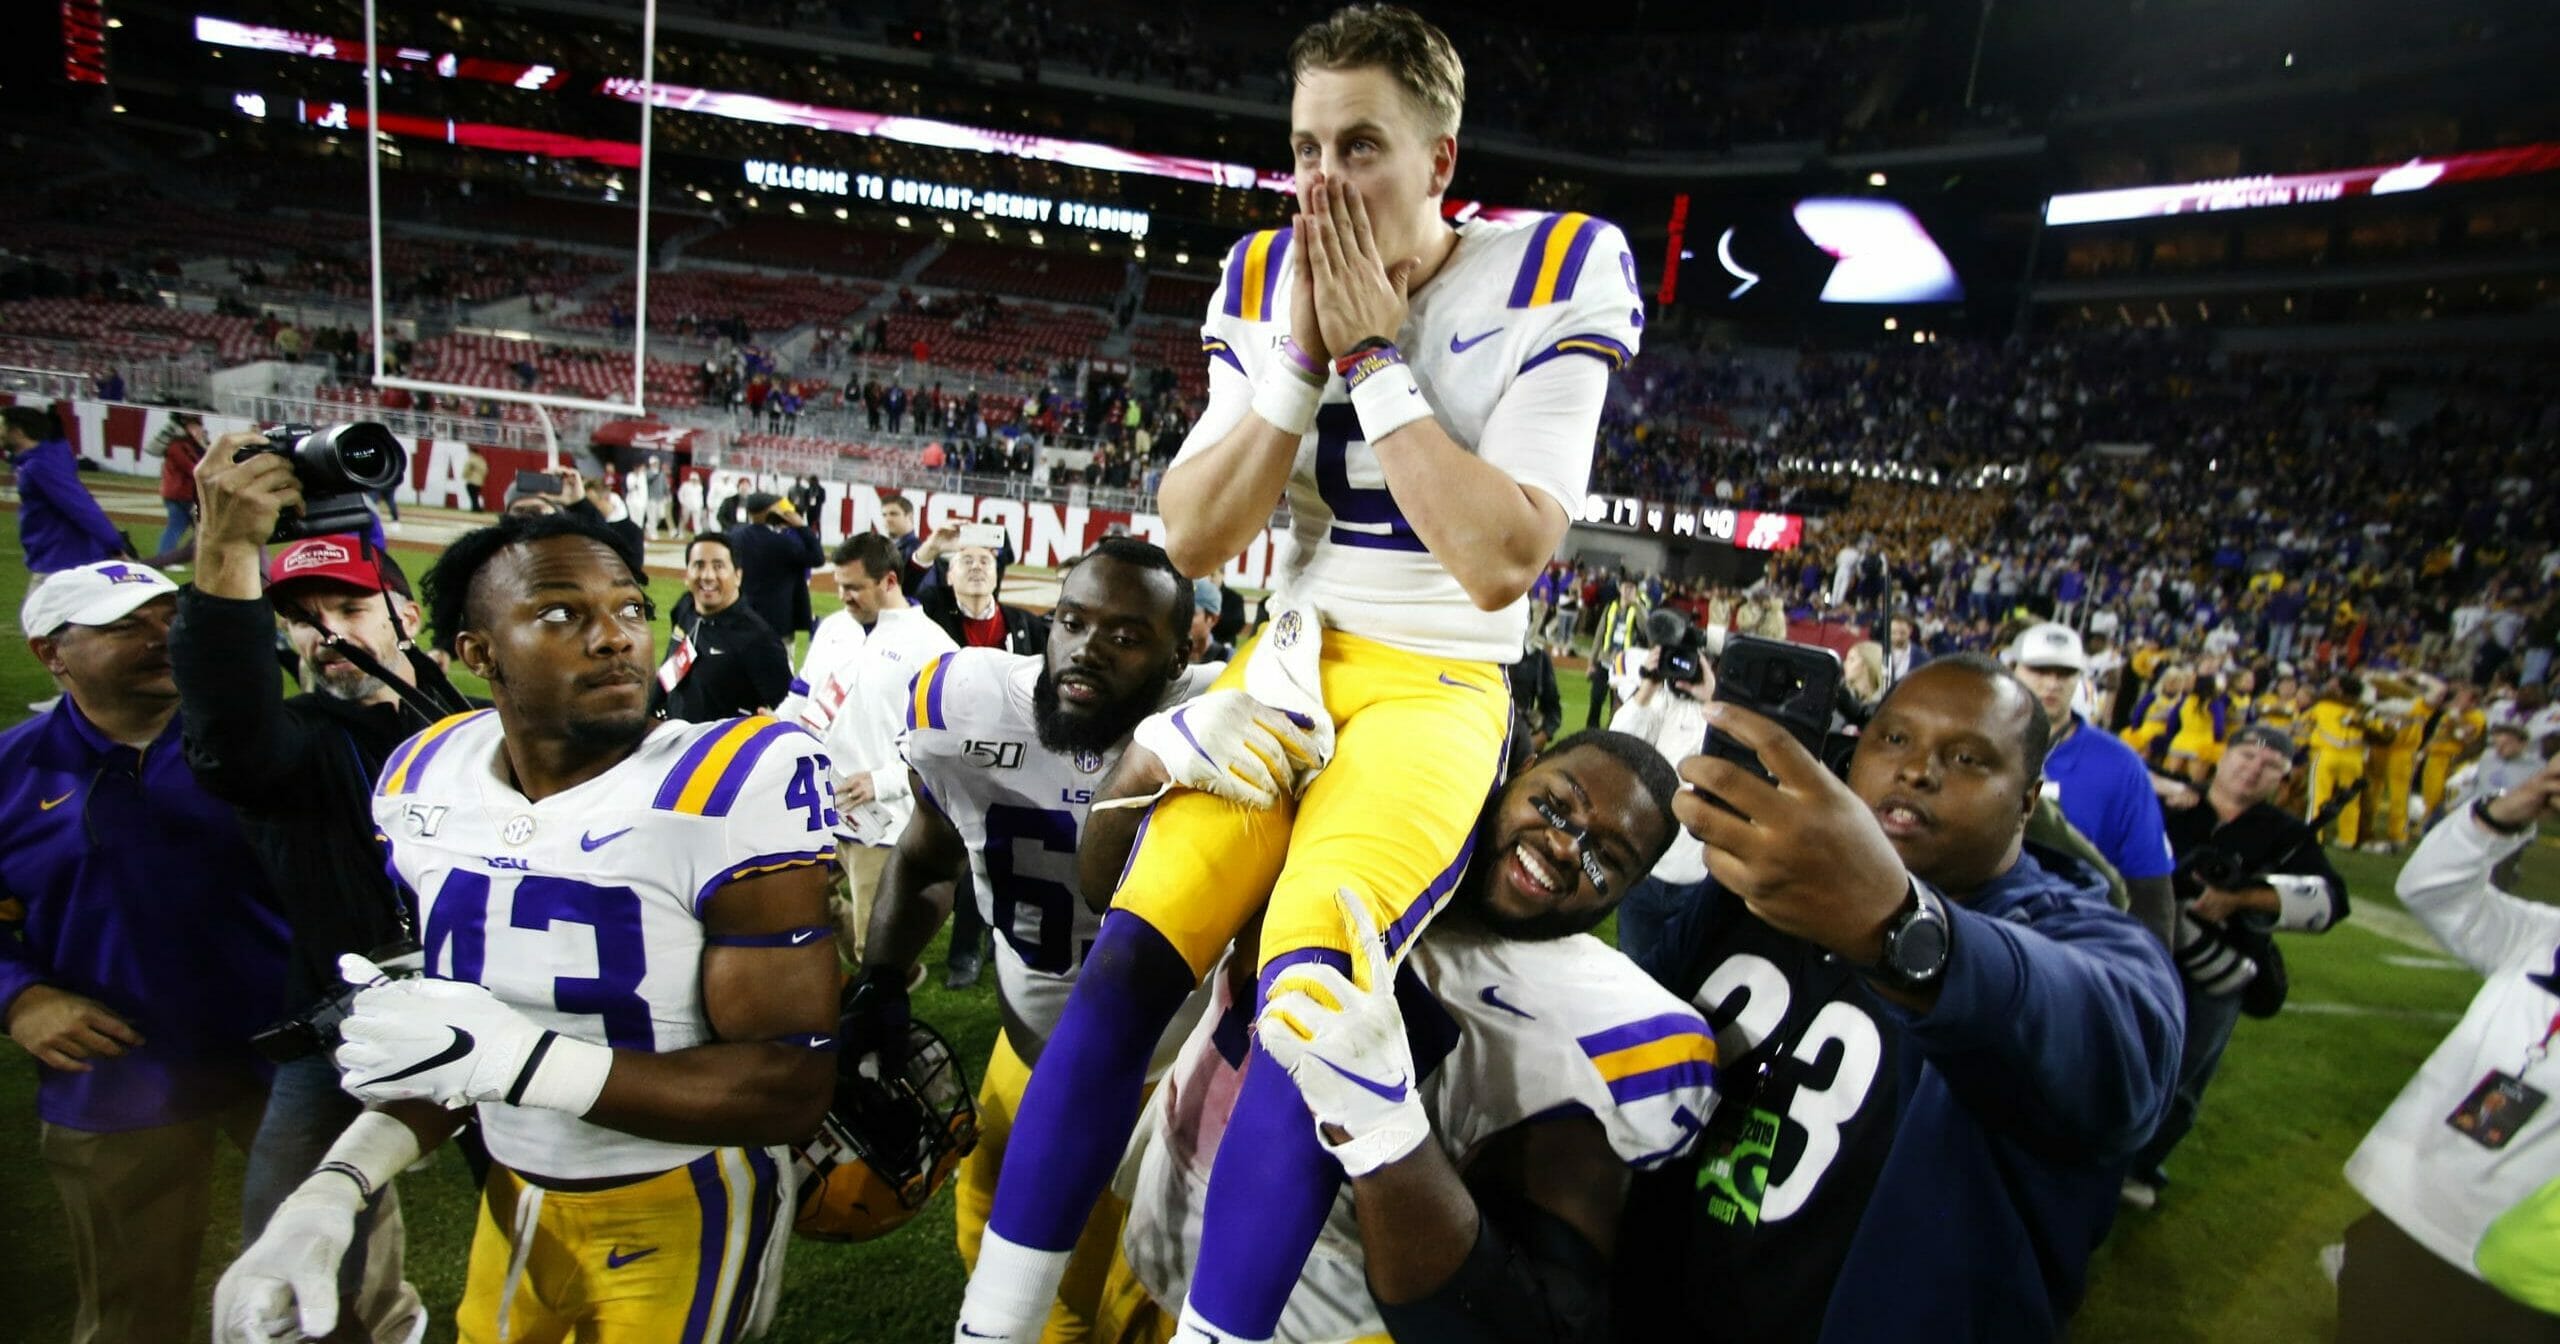 LSU quarterback Joe Burrow (9) is carried off the field by his teammates after defeating Alabama 46-41 in an NCAA college football game on Nov. 9, 2019, in Tuscaloosa , Alabama.